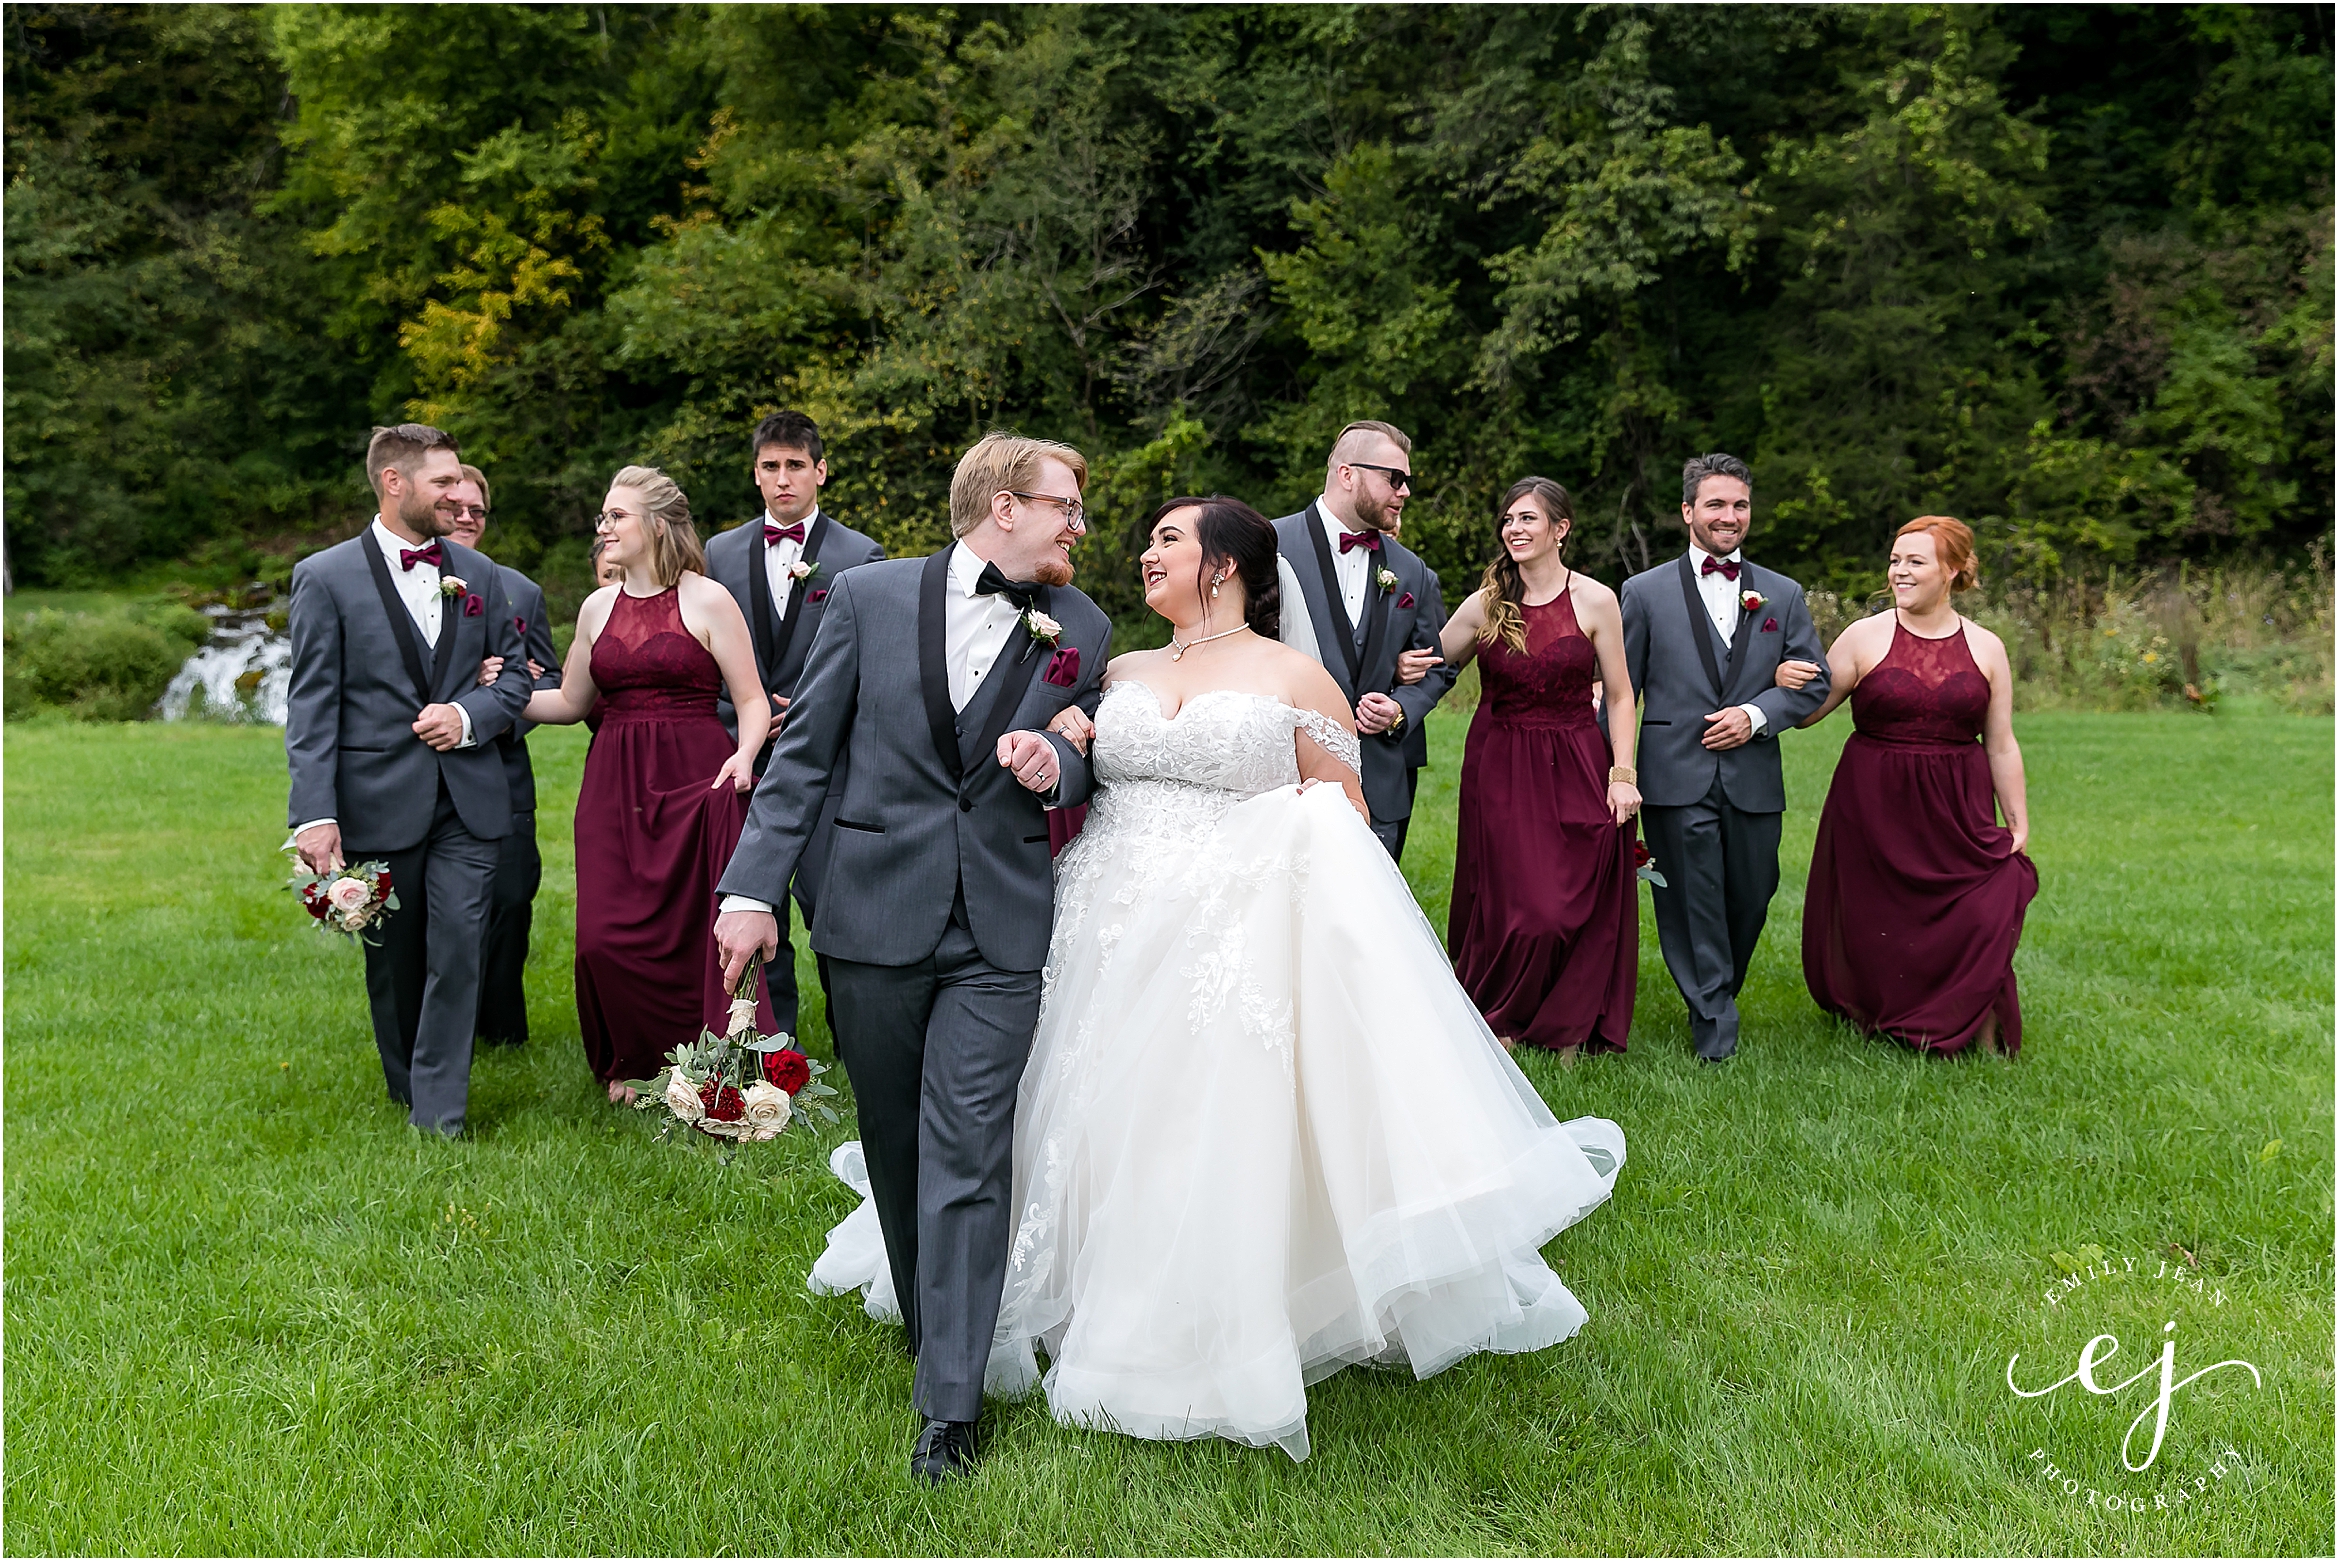 walking grey tuxedos and red dresses bridal wedding party bride and groom long veil lace grey suit dipping winnebago springs wedding venue in caledonia minnesota